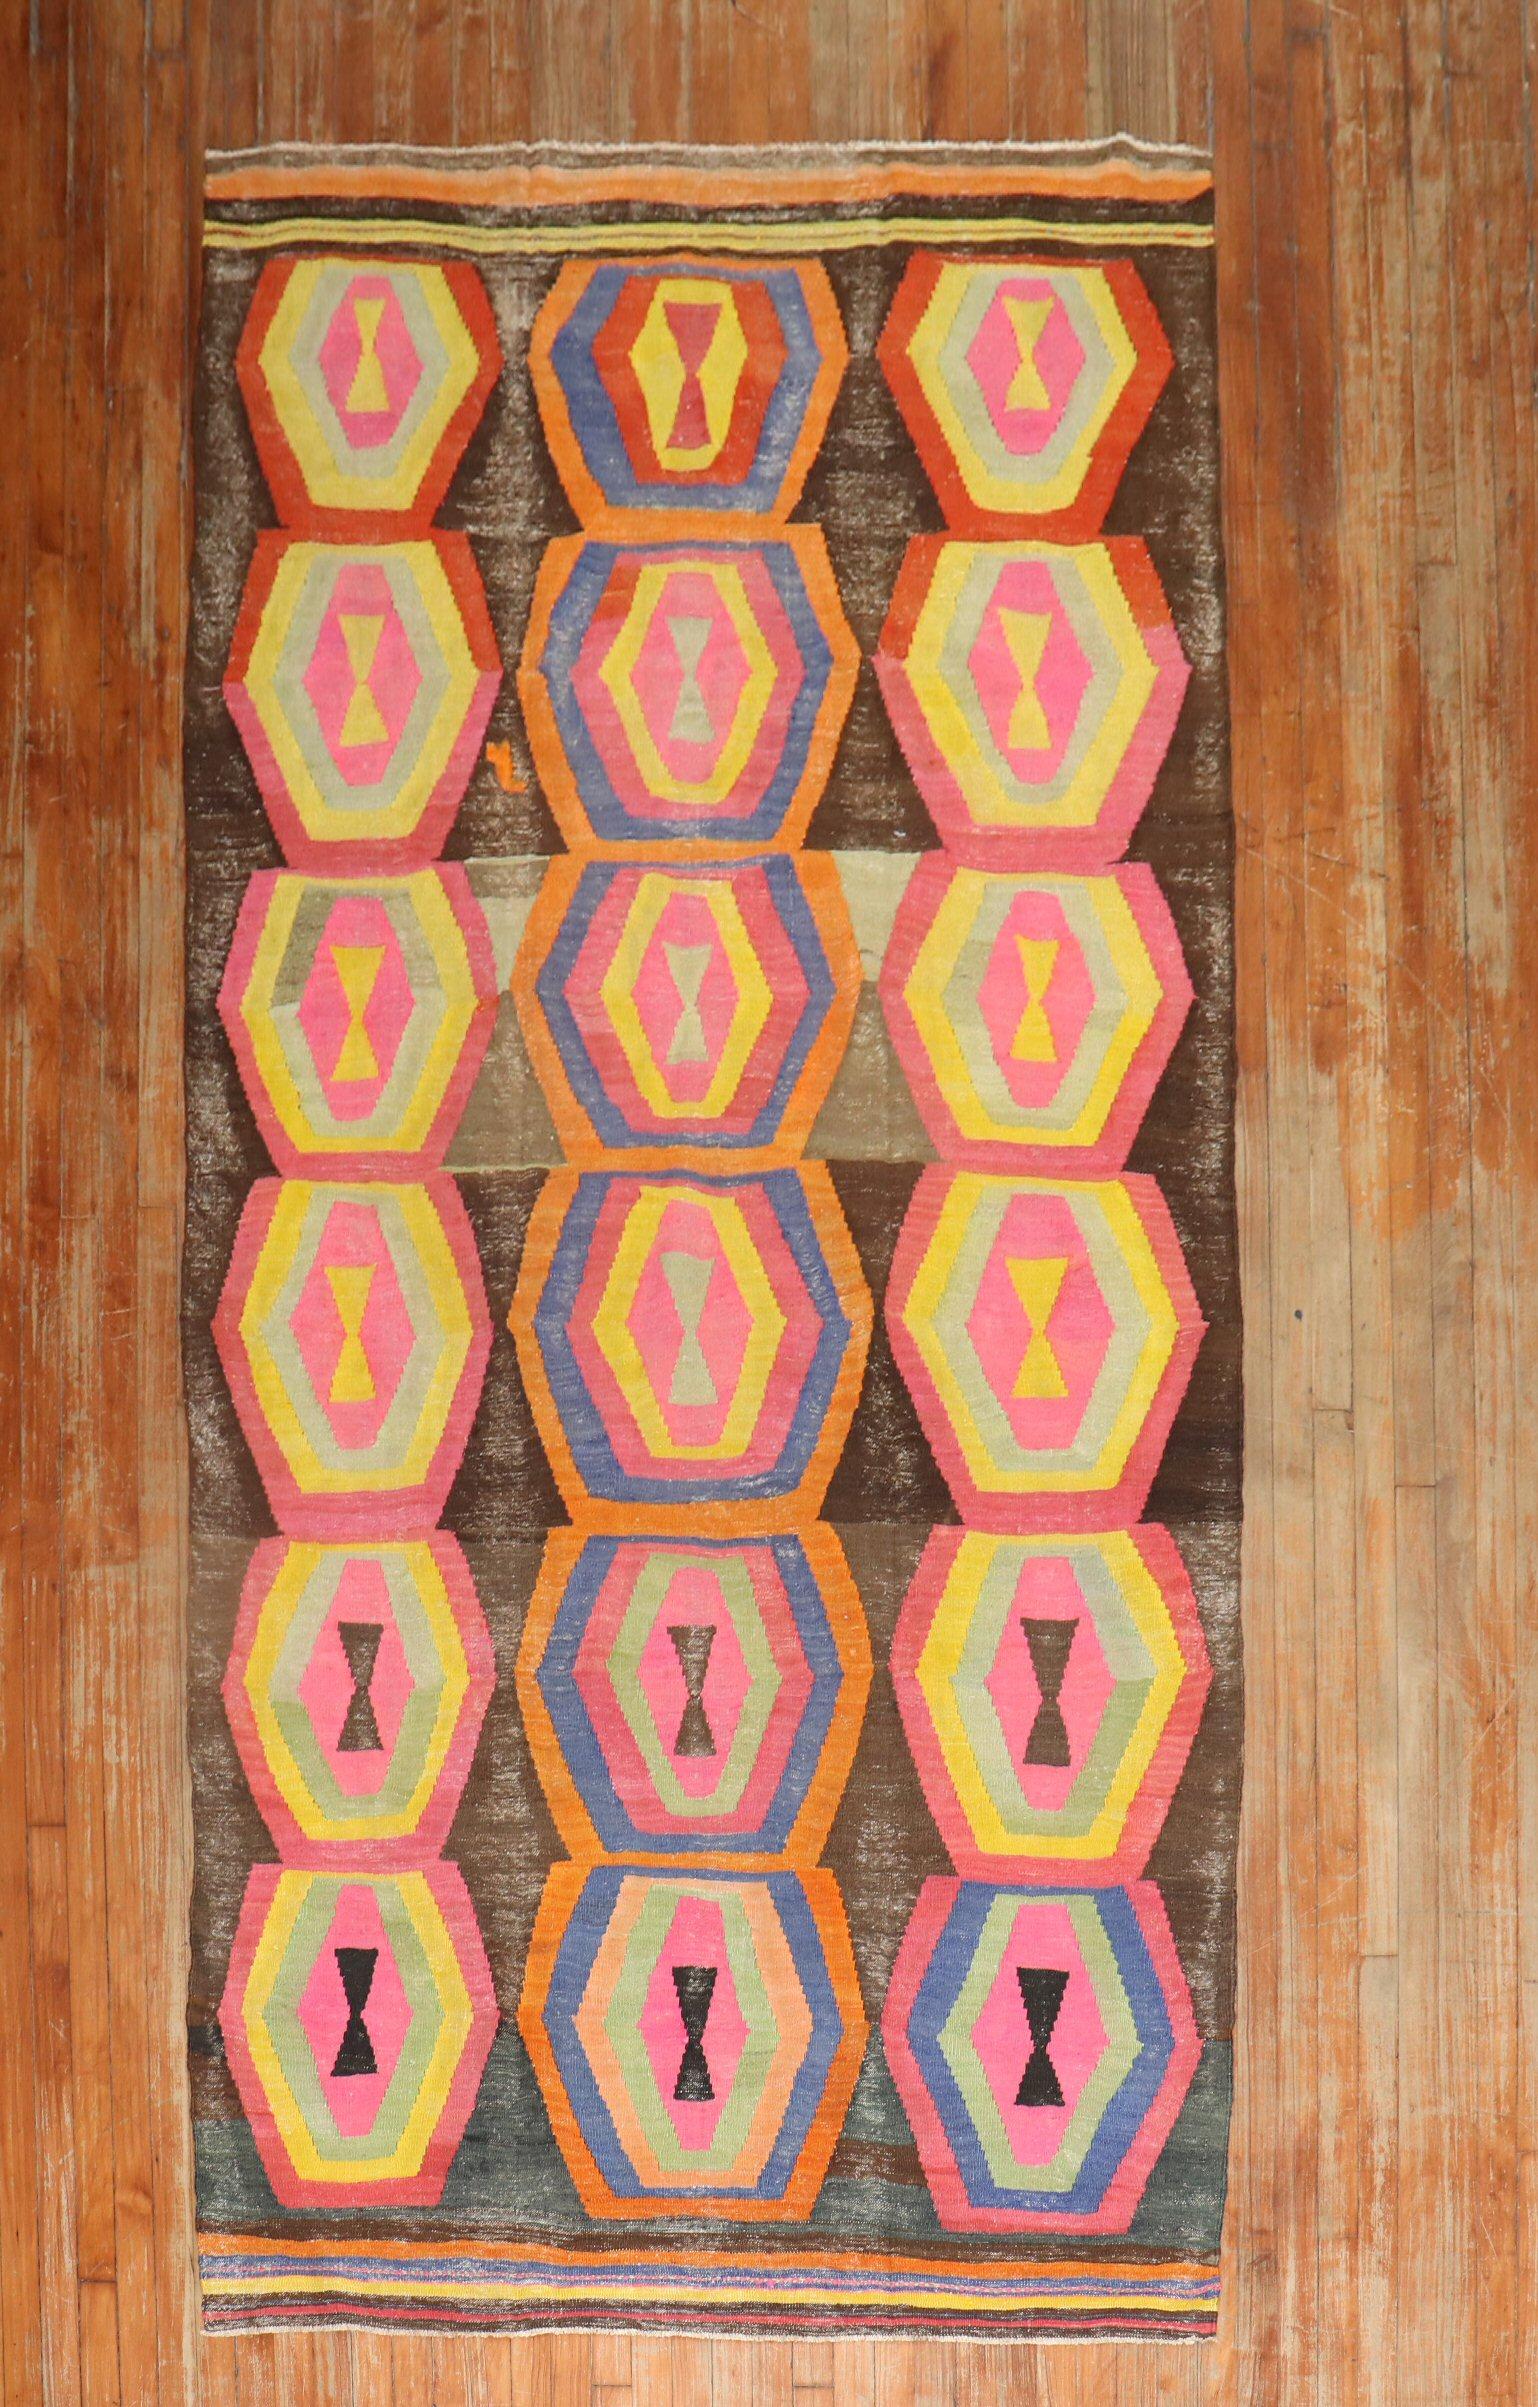 One of the funkiest colored kilims we have ever acquired in a gallery size format

Measures: 5